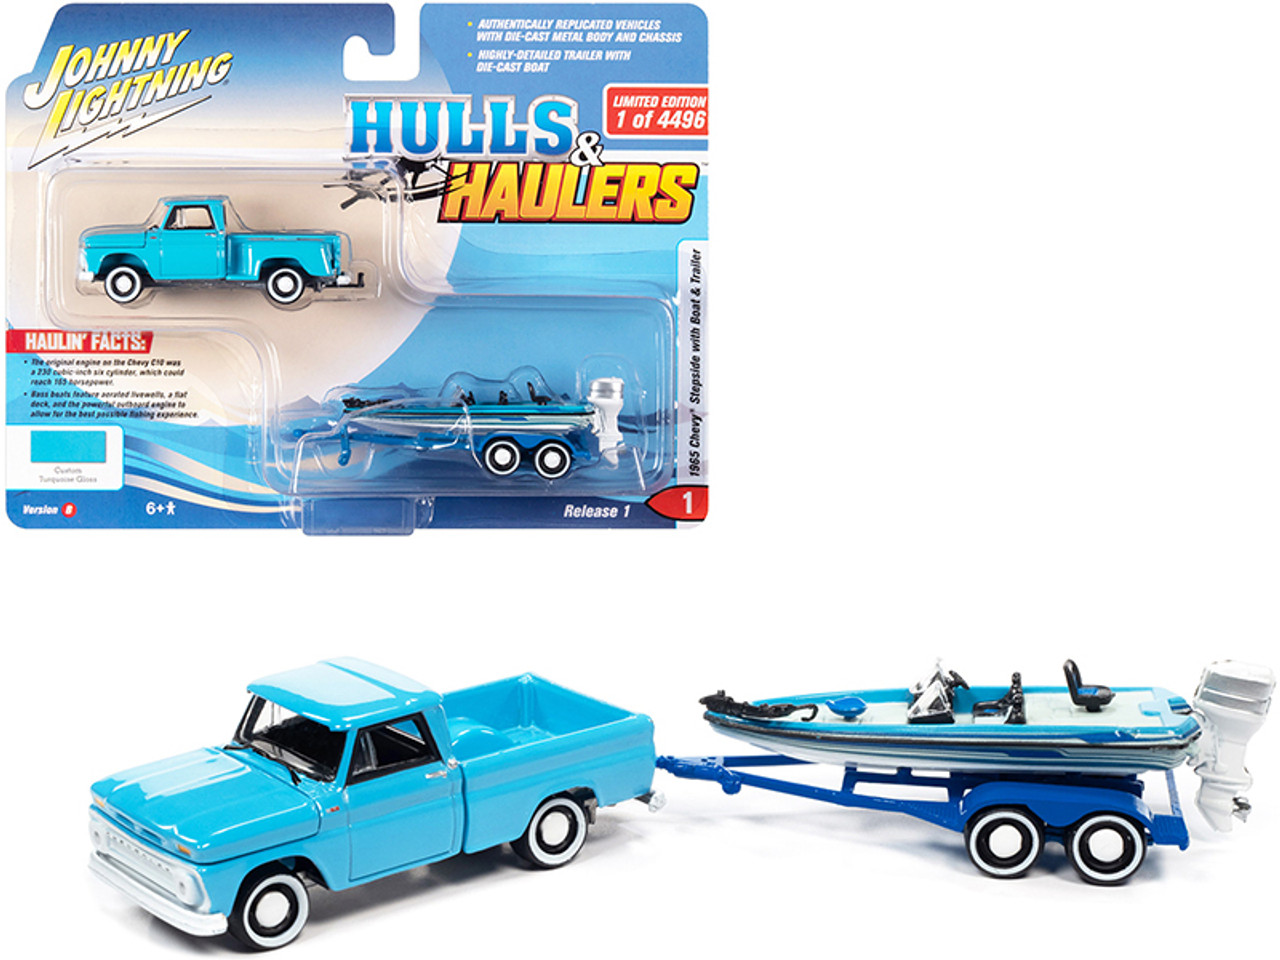 1965 Chevrolet Stepside Pickup Truck Custom Turquoise with Bass Boat and  Trailer Limited Edition to 4496 pieces Worldwide Hulls & Haulers Series